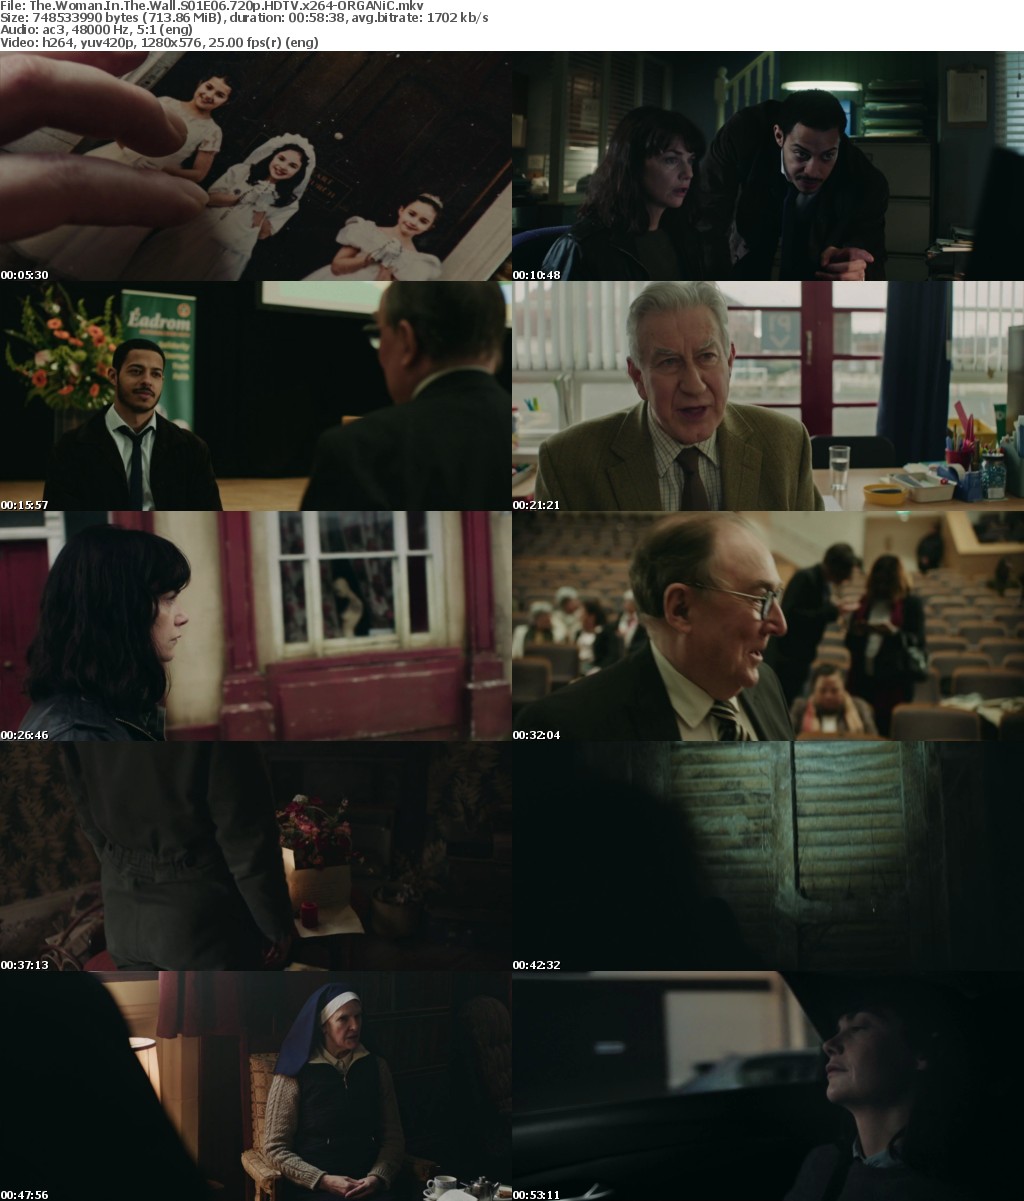 The Woman In The Wall S01E06 720p HDTV x264-ORGANiC